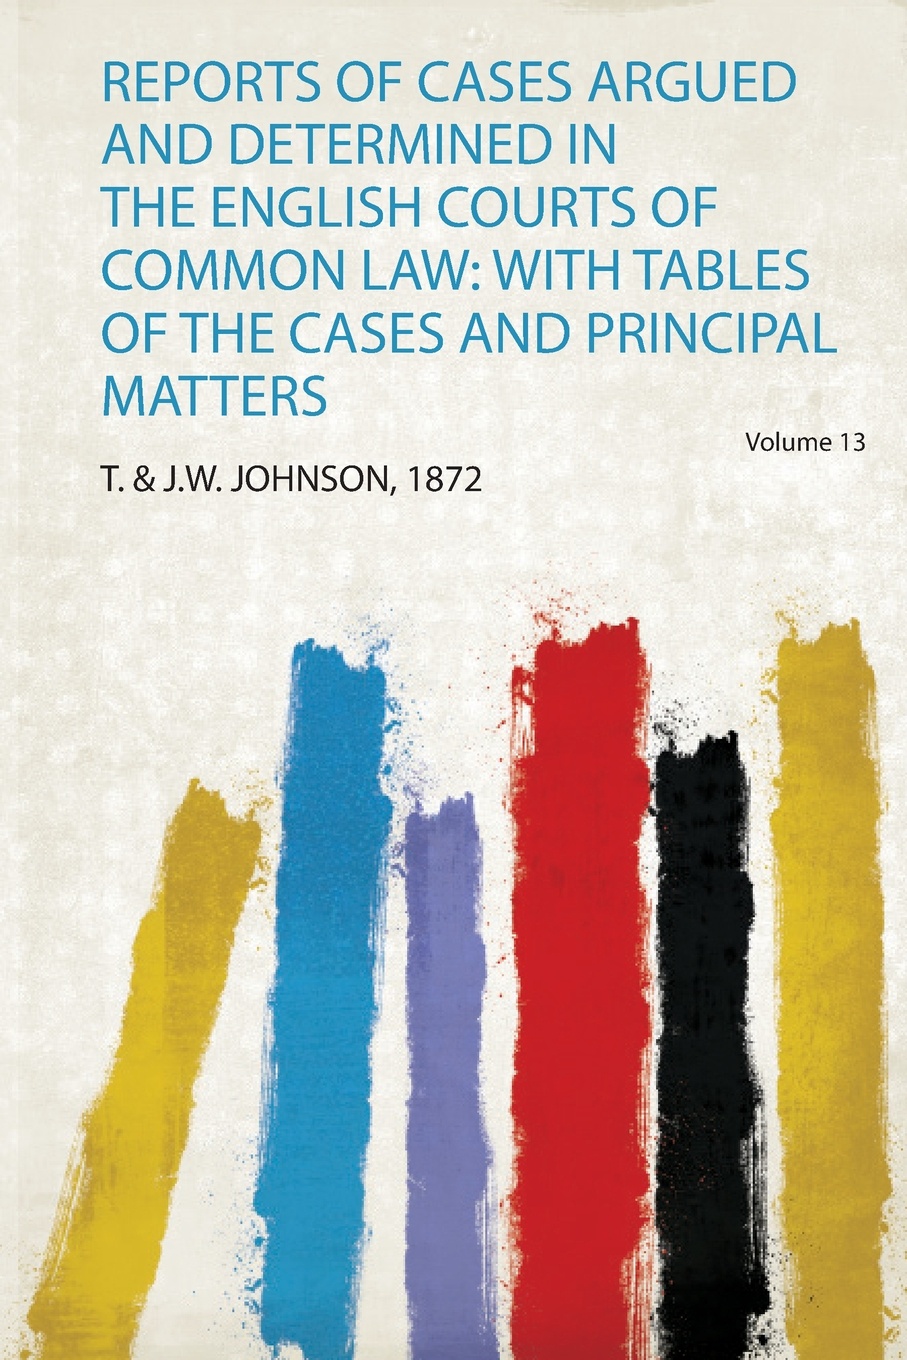 Reports of Cases Argued and Determined in the English Courts of Common Law. With Tables of the Cases and Principal Matters